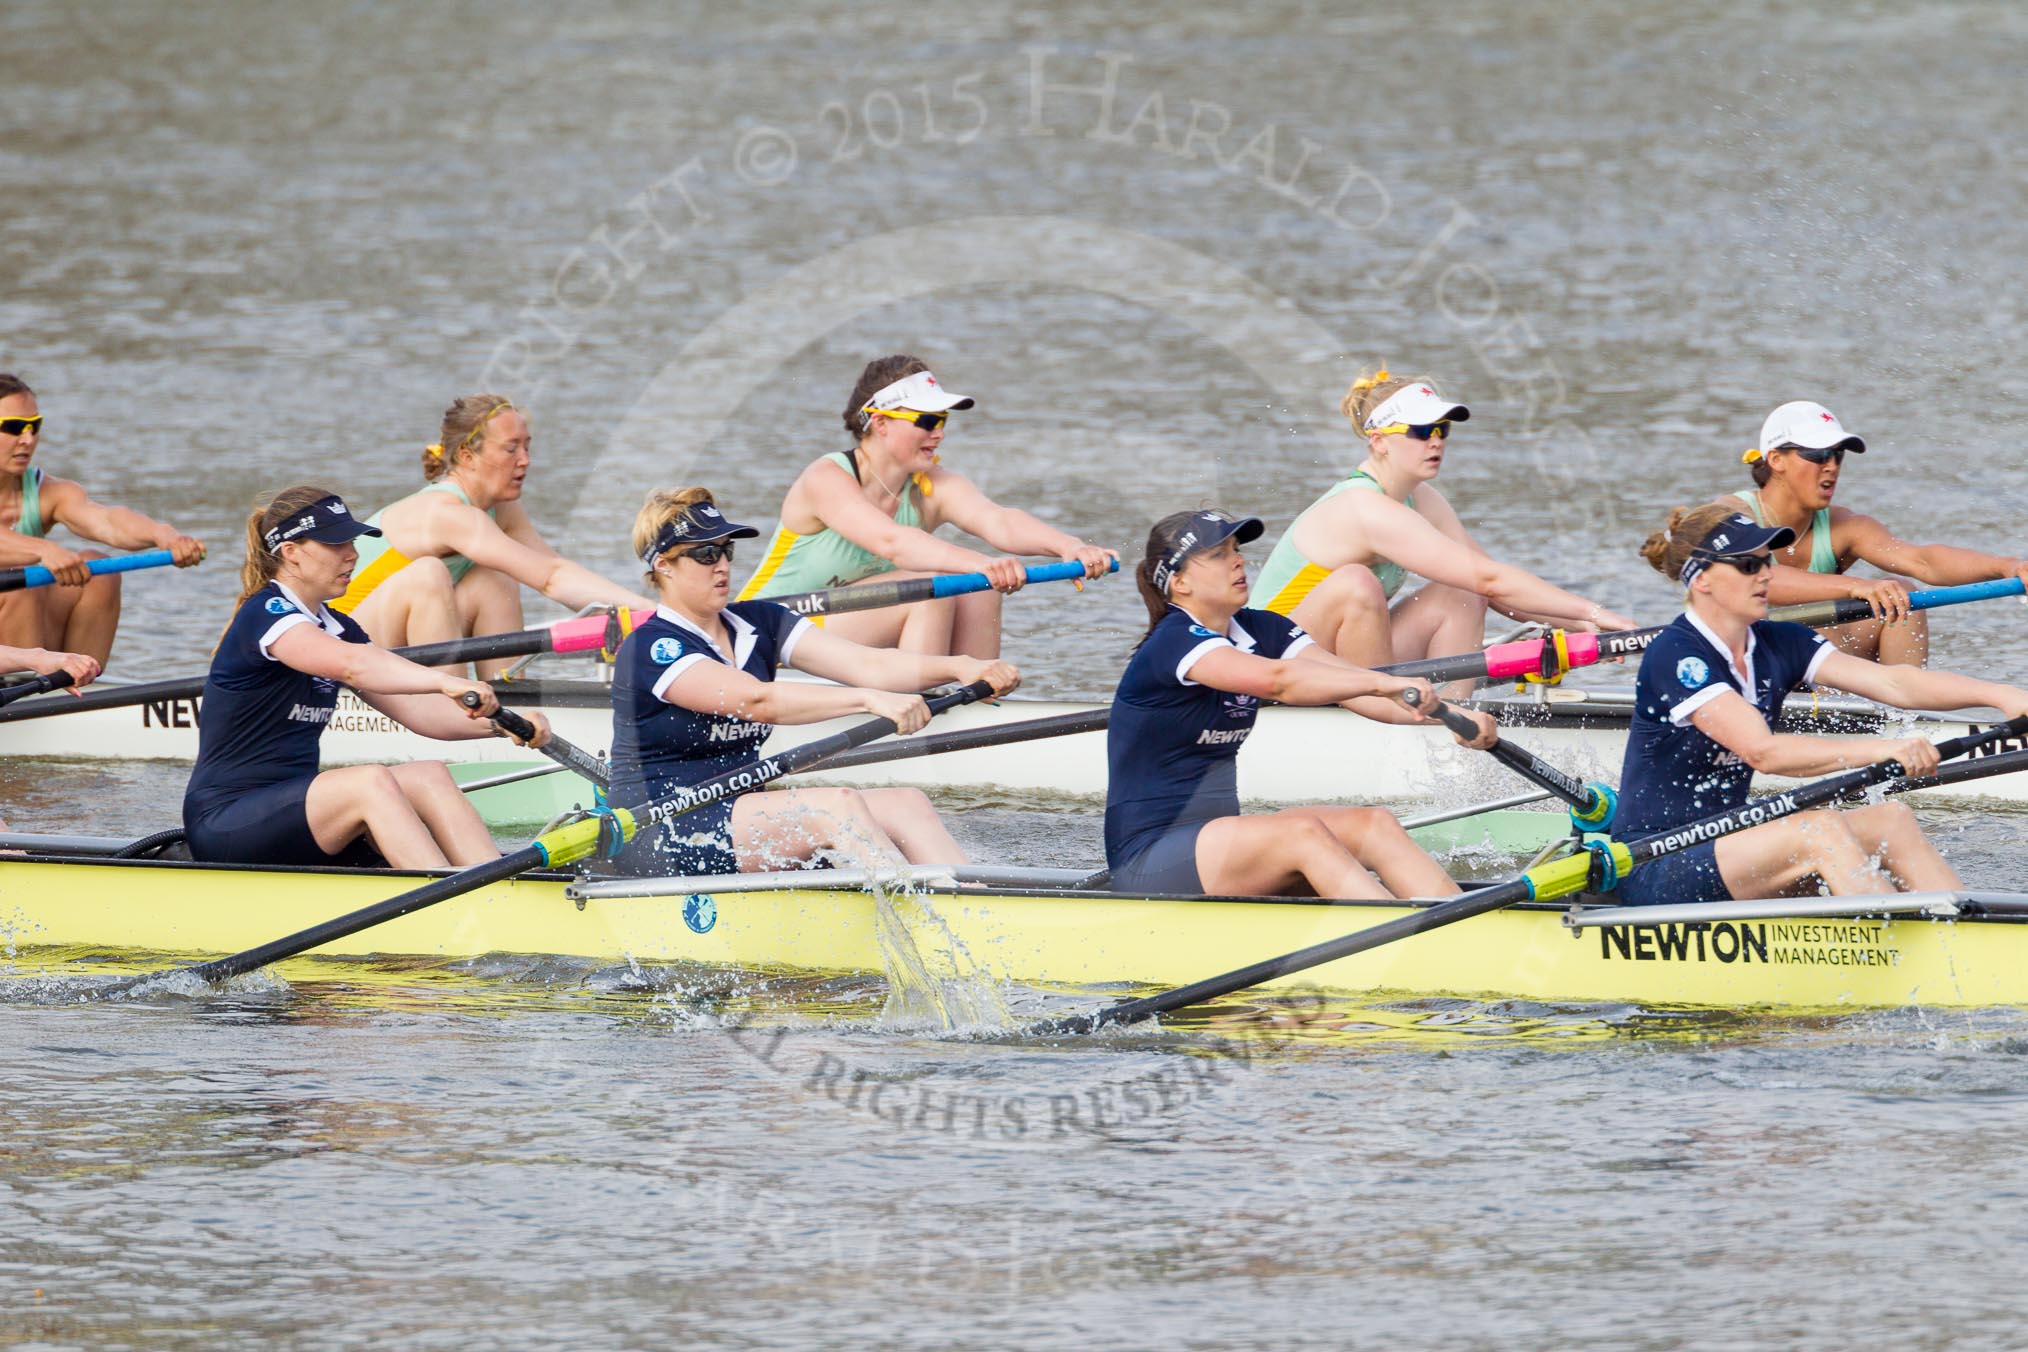 The Boat Race season 2015 - Newton Women's Boat Race.
River Thames between Putney and Mortlake,
London,

United Kingdom,
on 10 April 2015 at 16:03, image #123